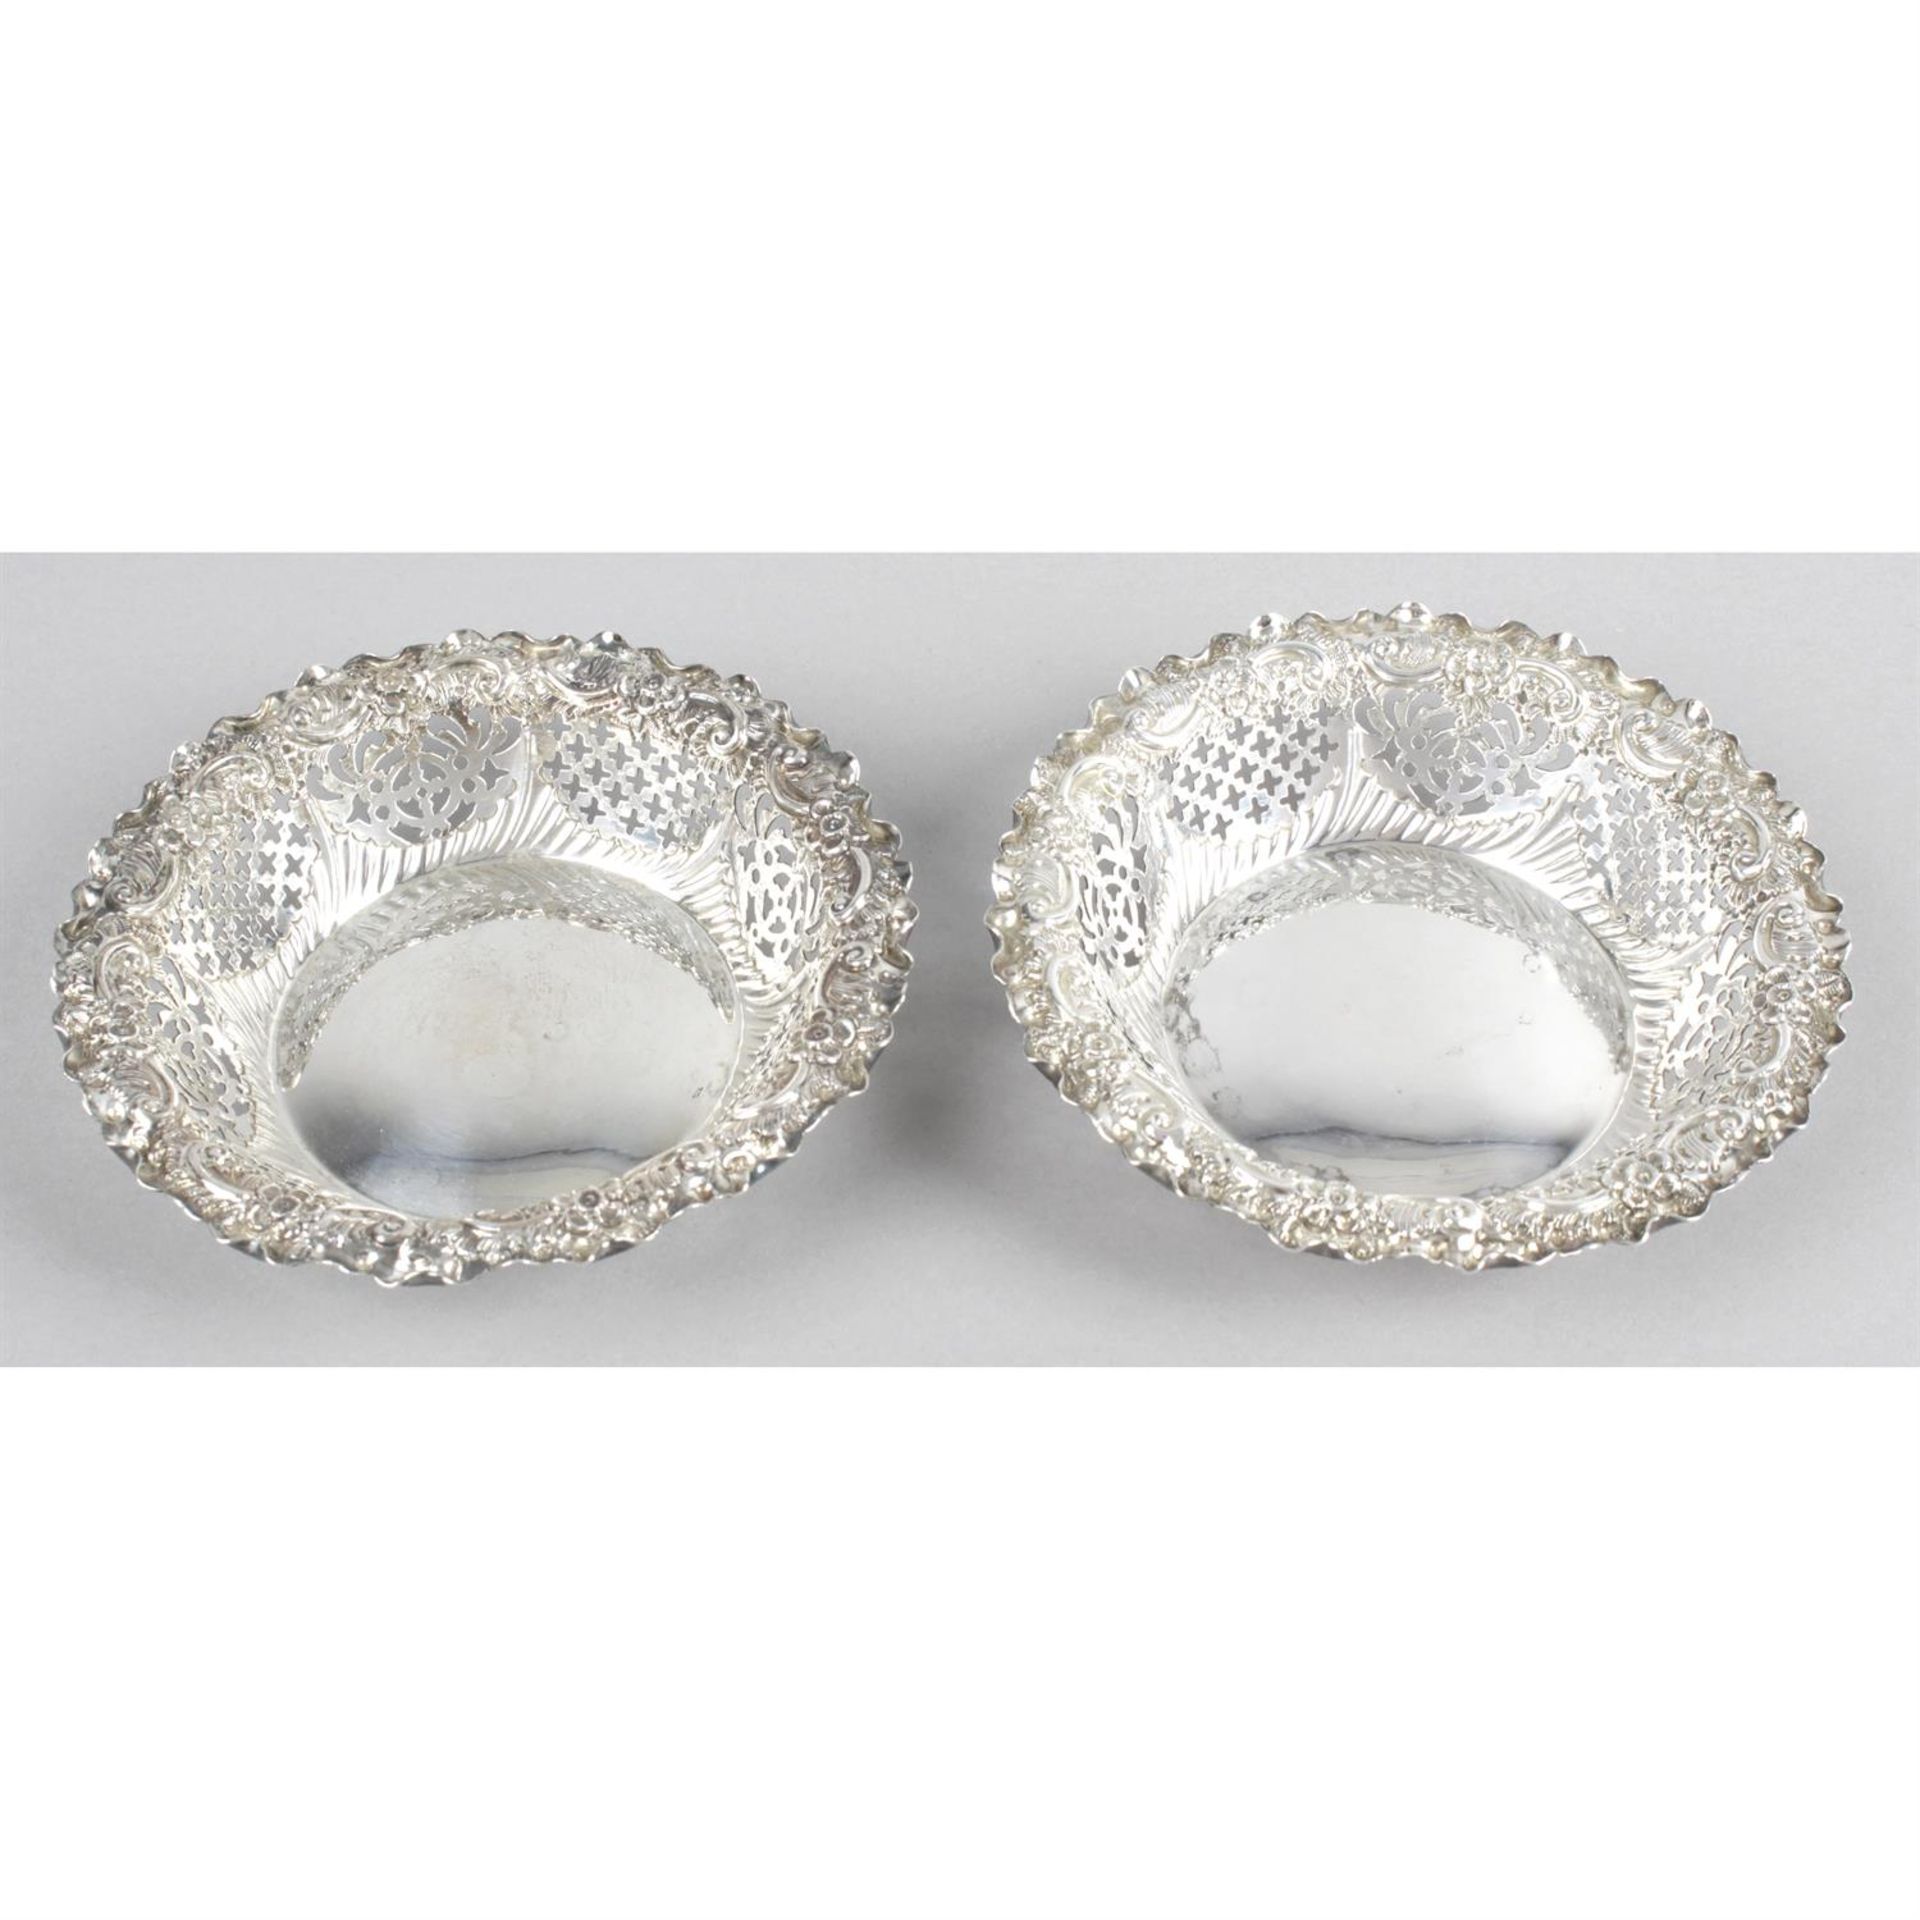 A pair of late Victorian Scottish silver pierced dishes.